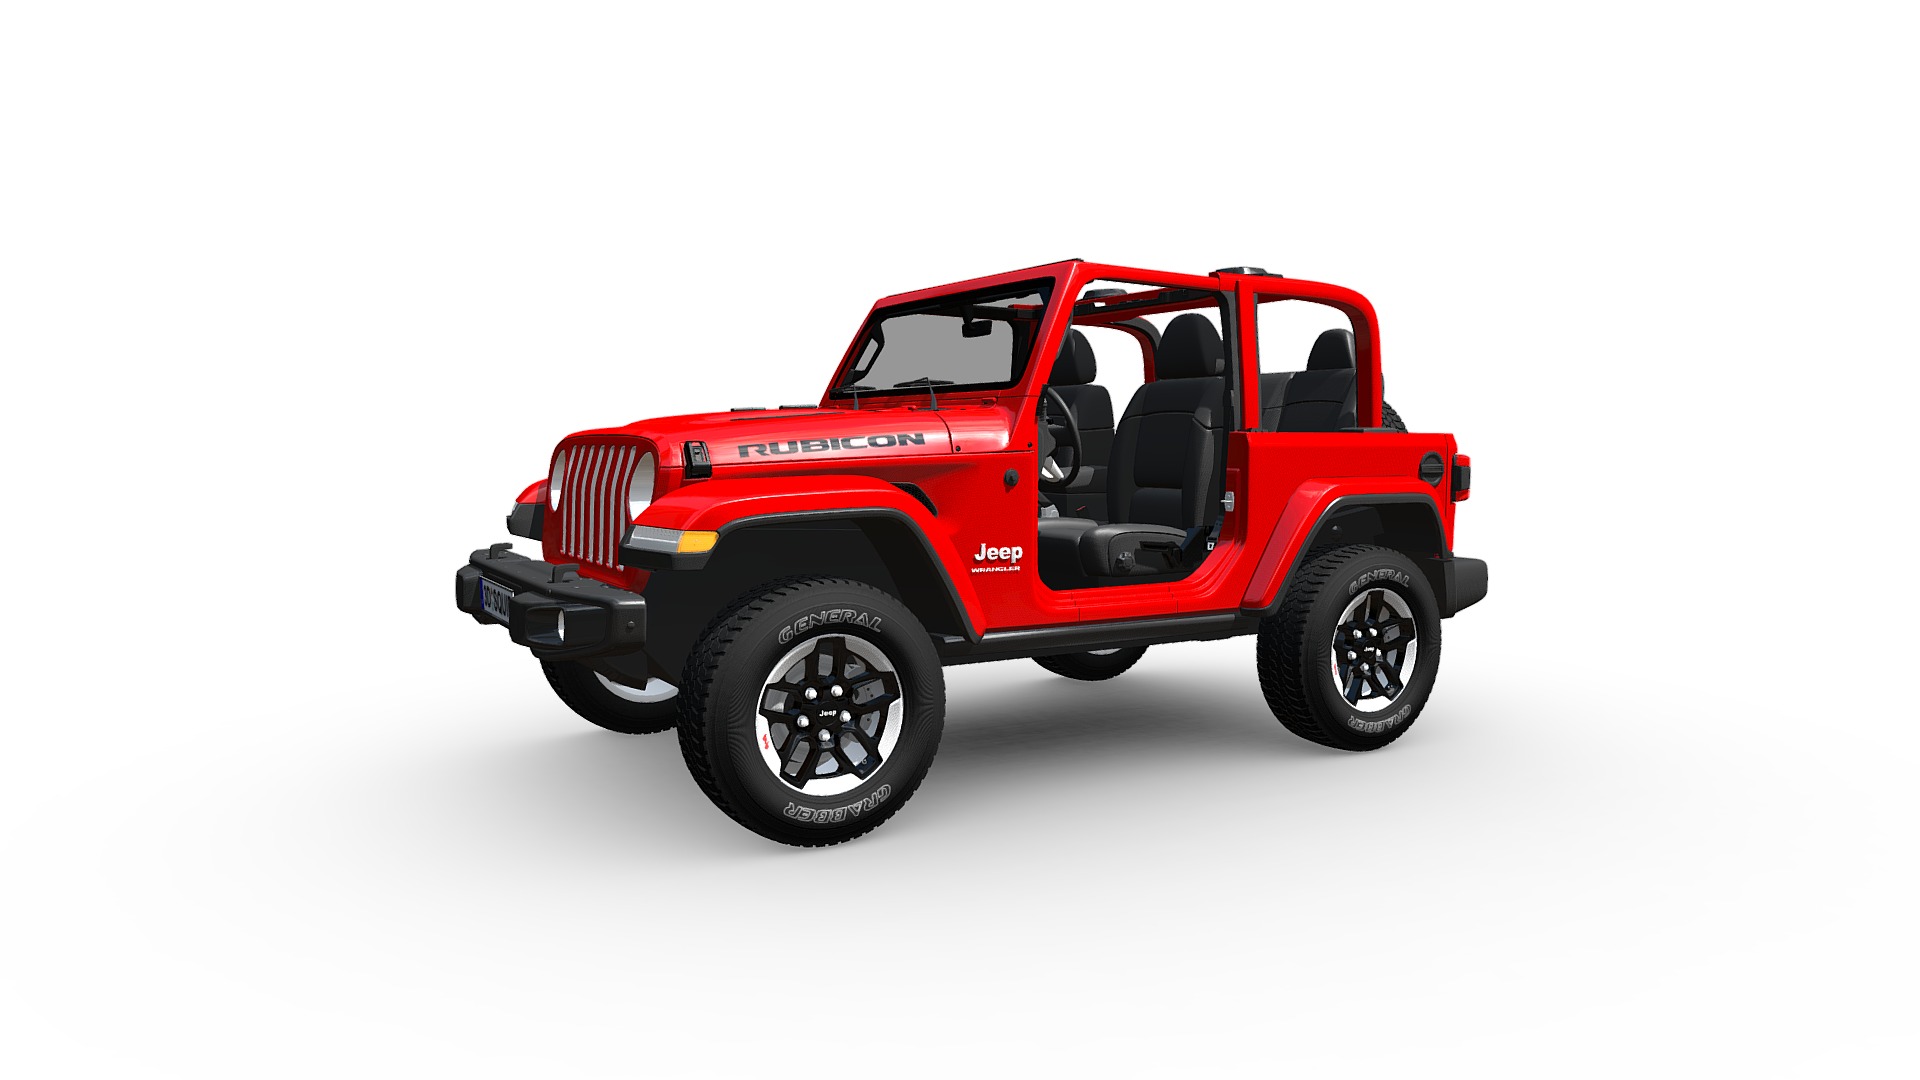 3D model Jeep Wrangler Rubicon 2018 Fbx - This is a 3D model of the Jeep Wrangler Rubicon 2018 Fbx. The 3D model is about a red truck with a white background.